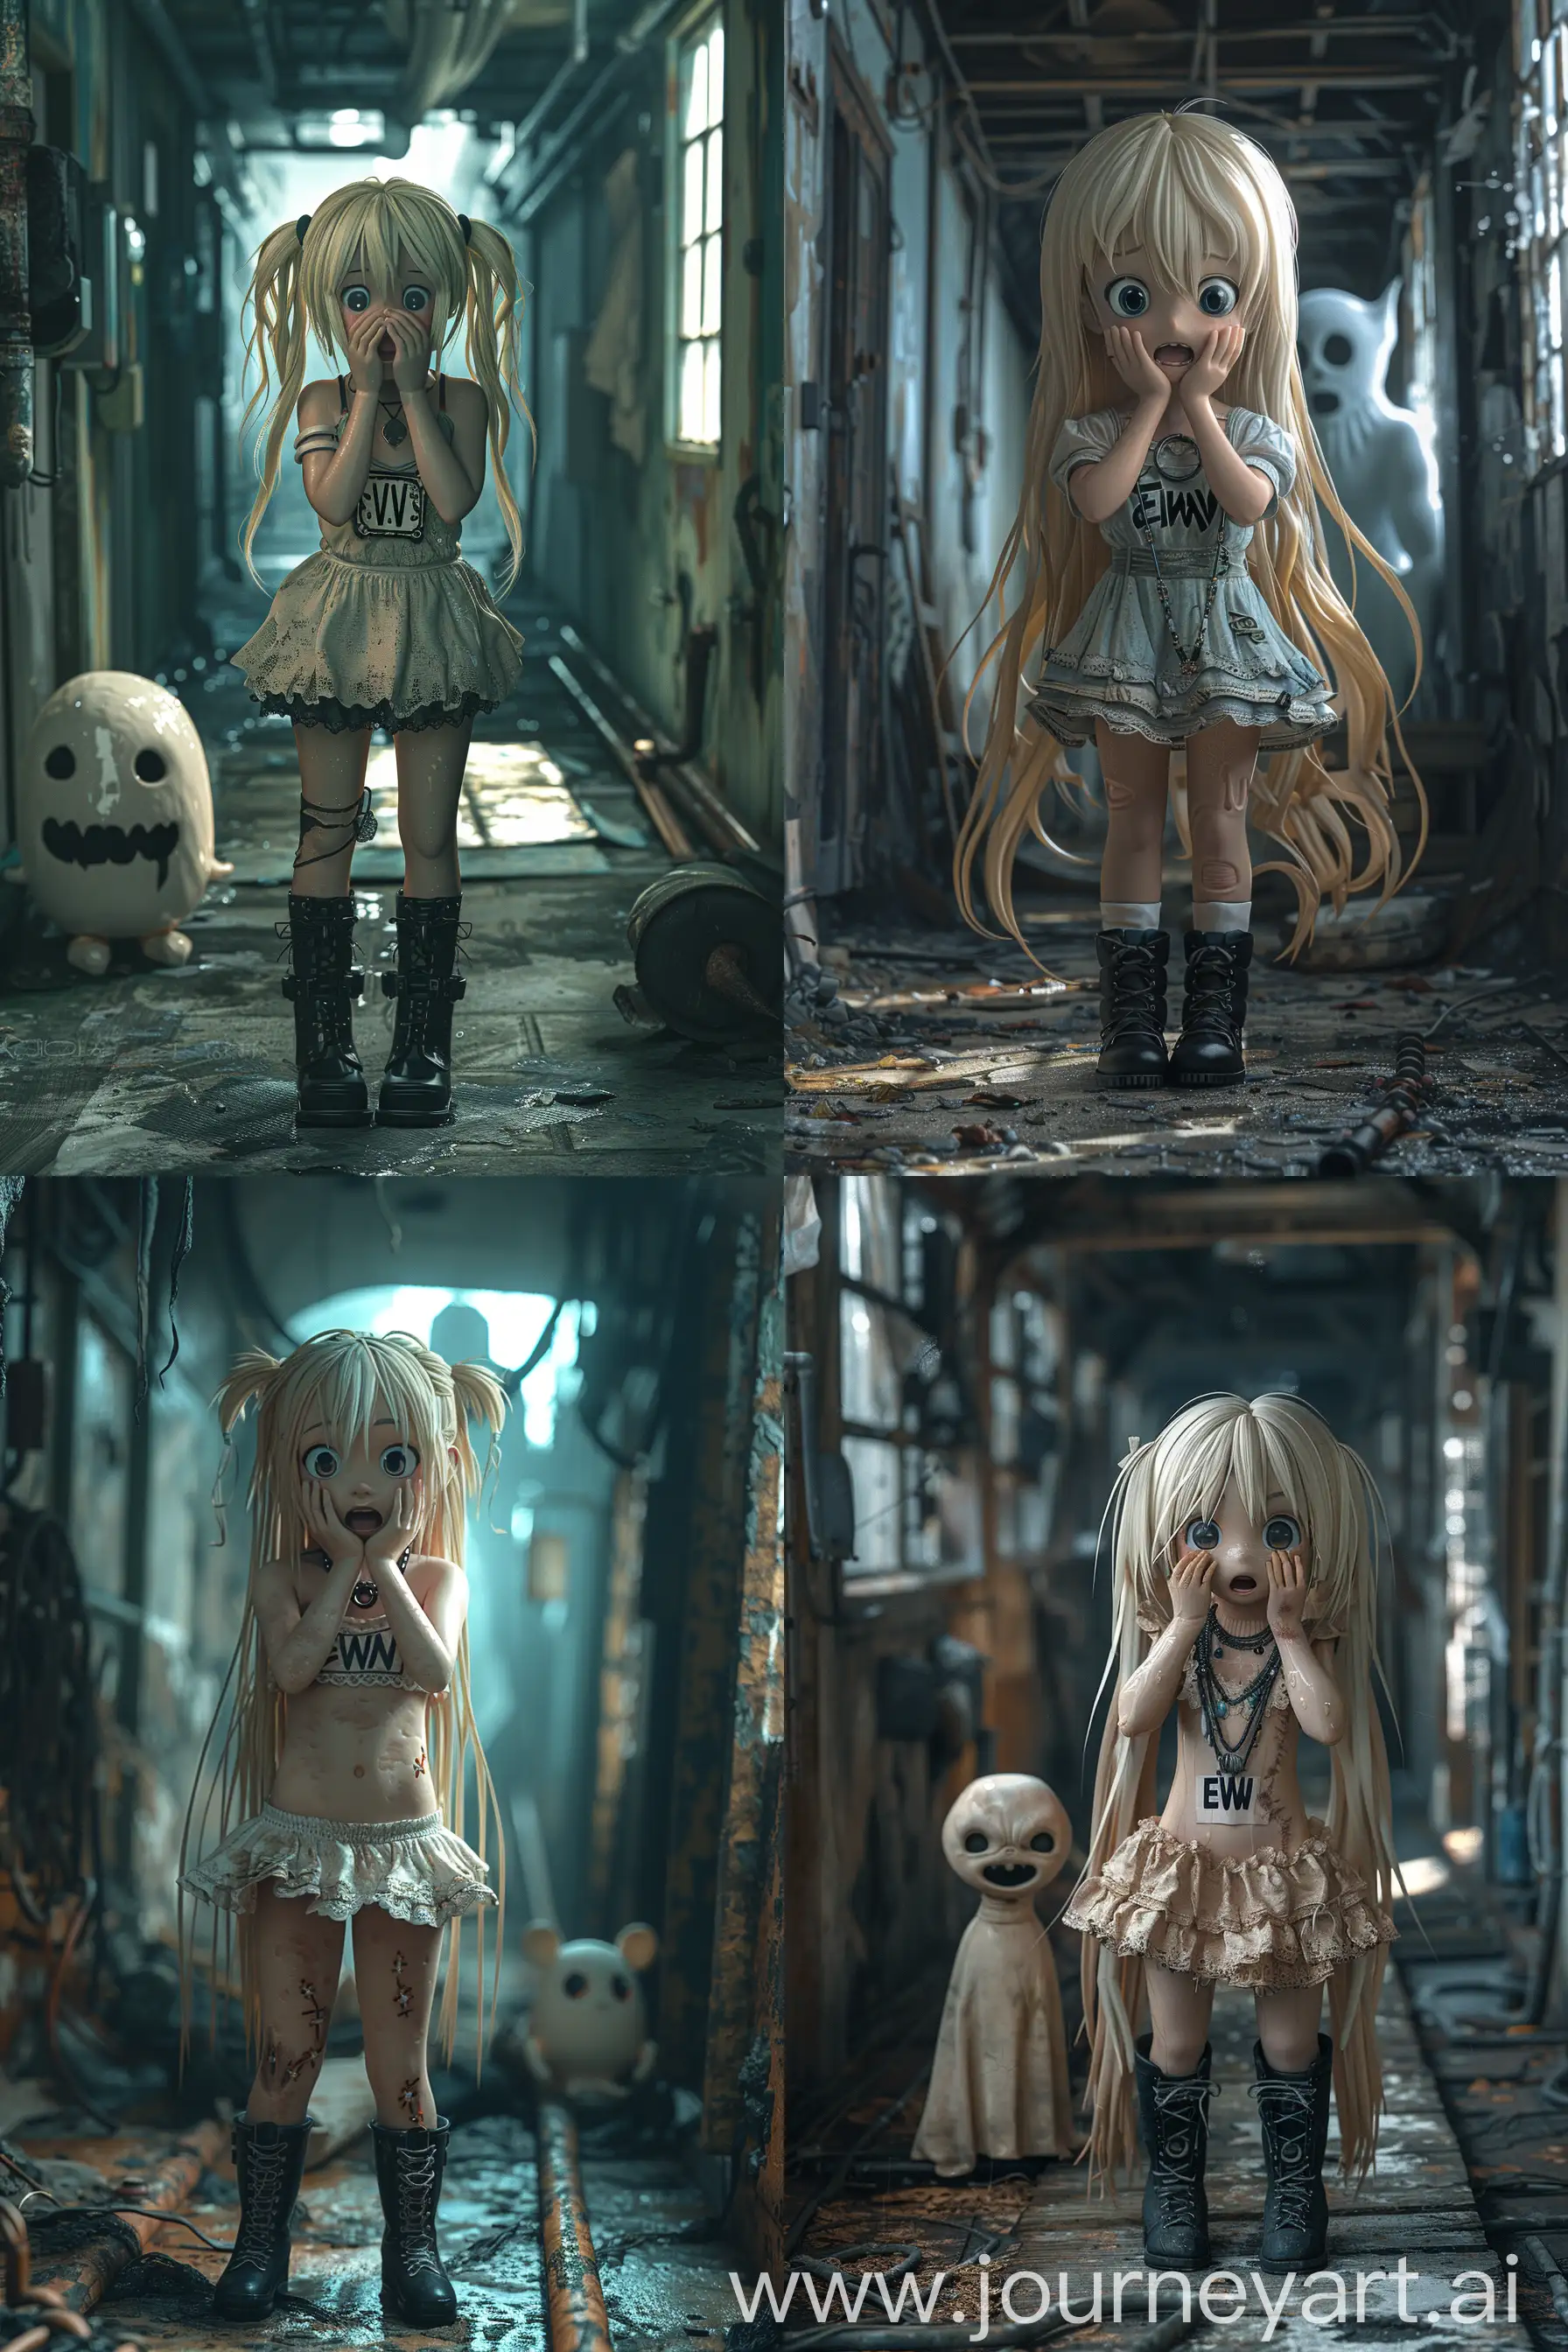 Anxious-Blonde-Anime-Girl-in-Spooky-Corridor-with-Ghost